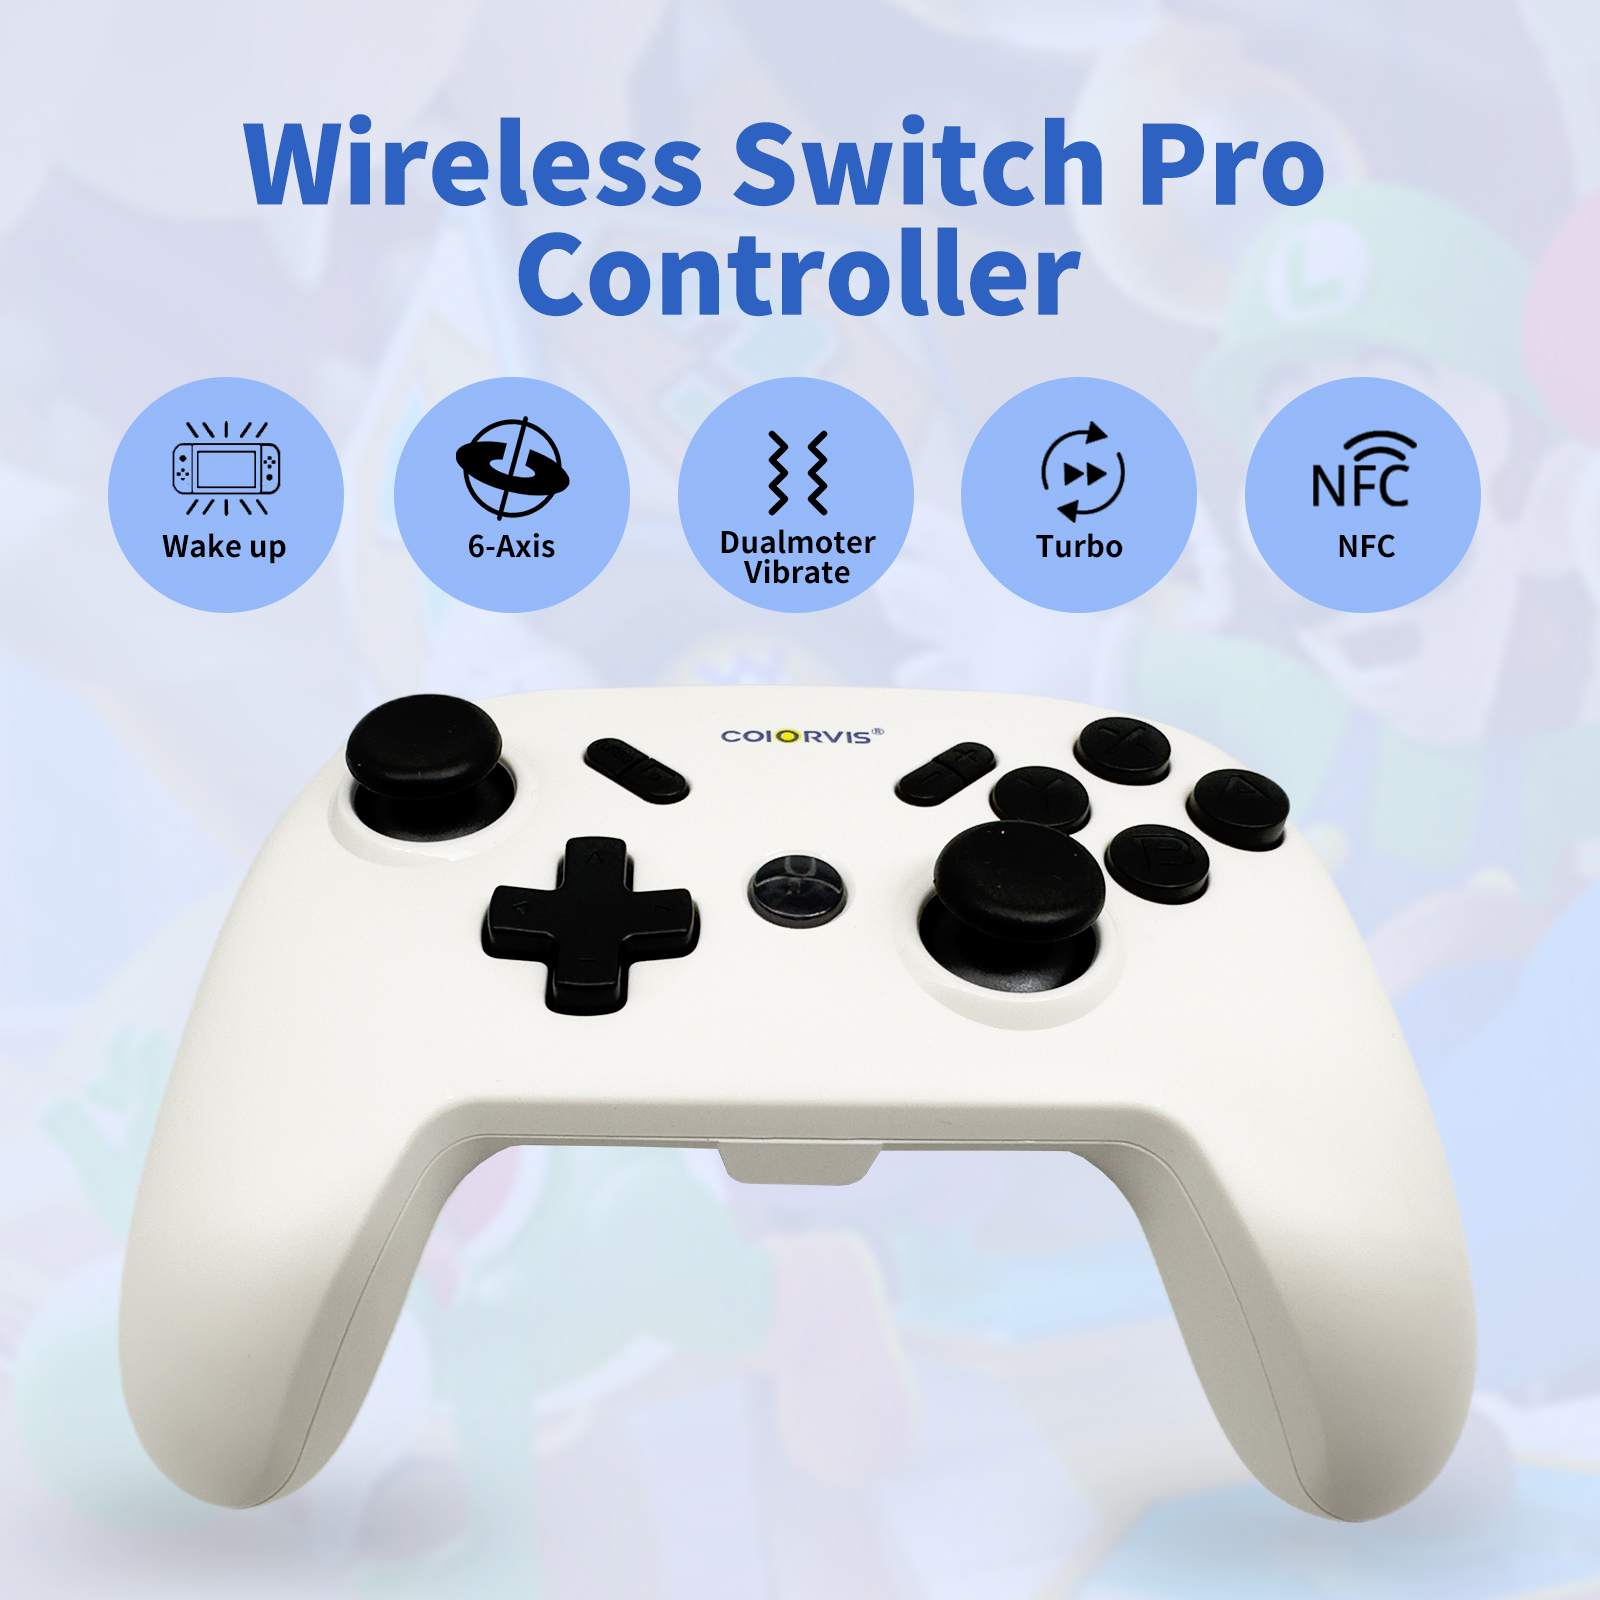 Wireless controller with Bluetooth 5.0 technology